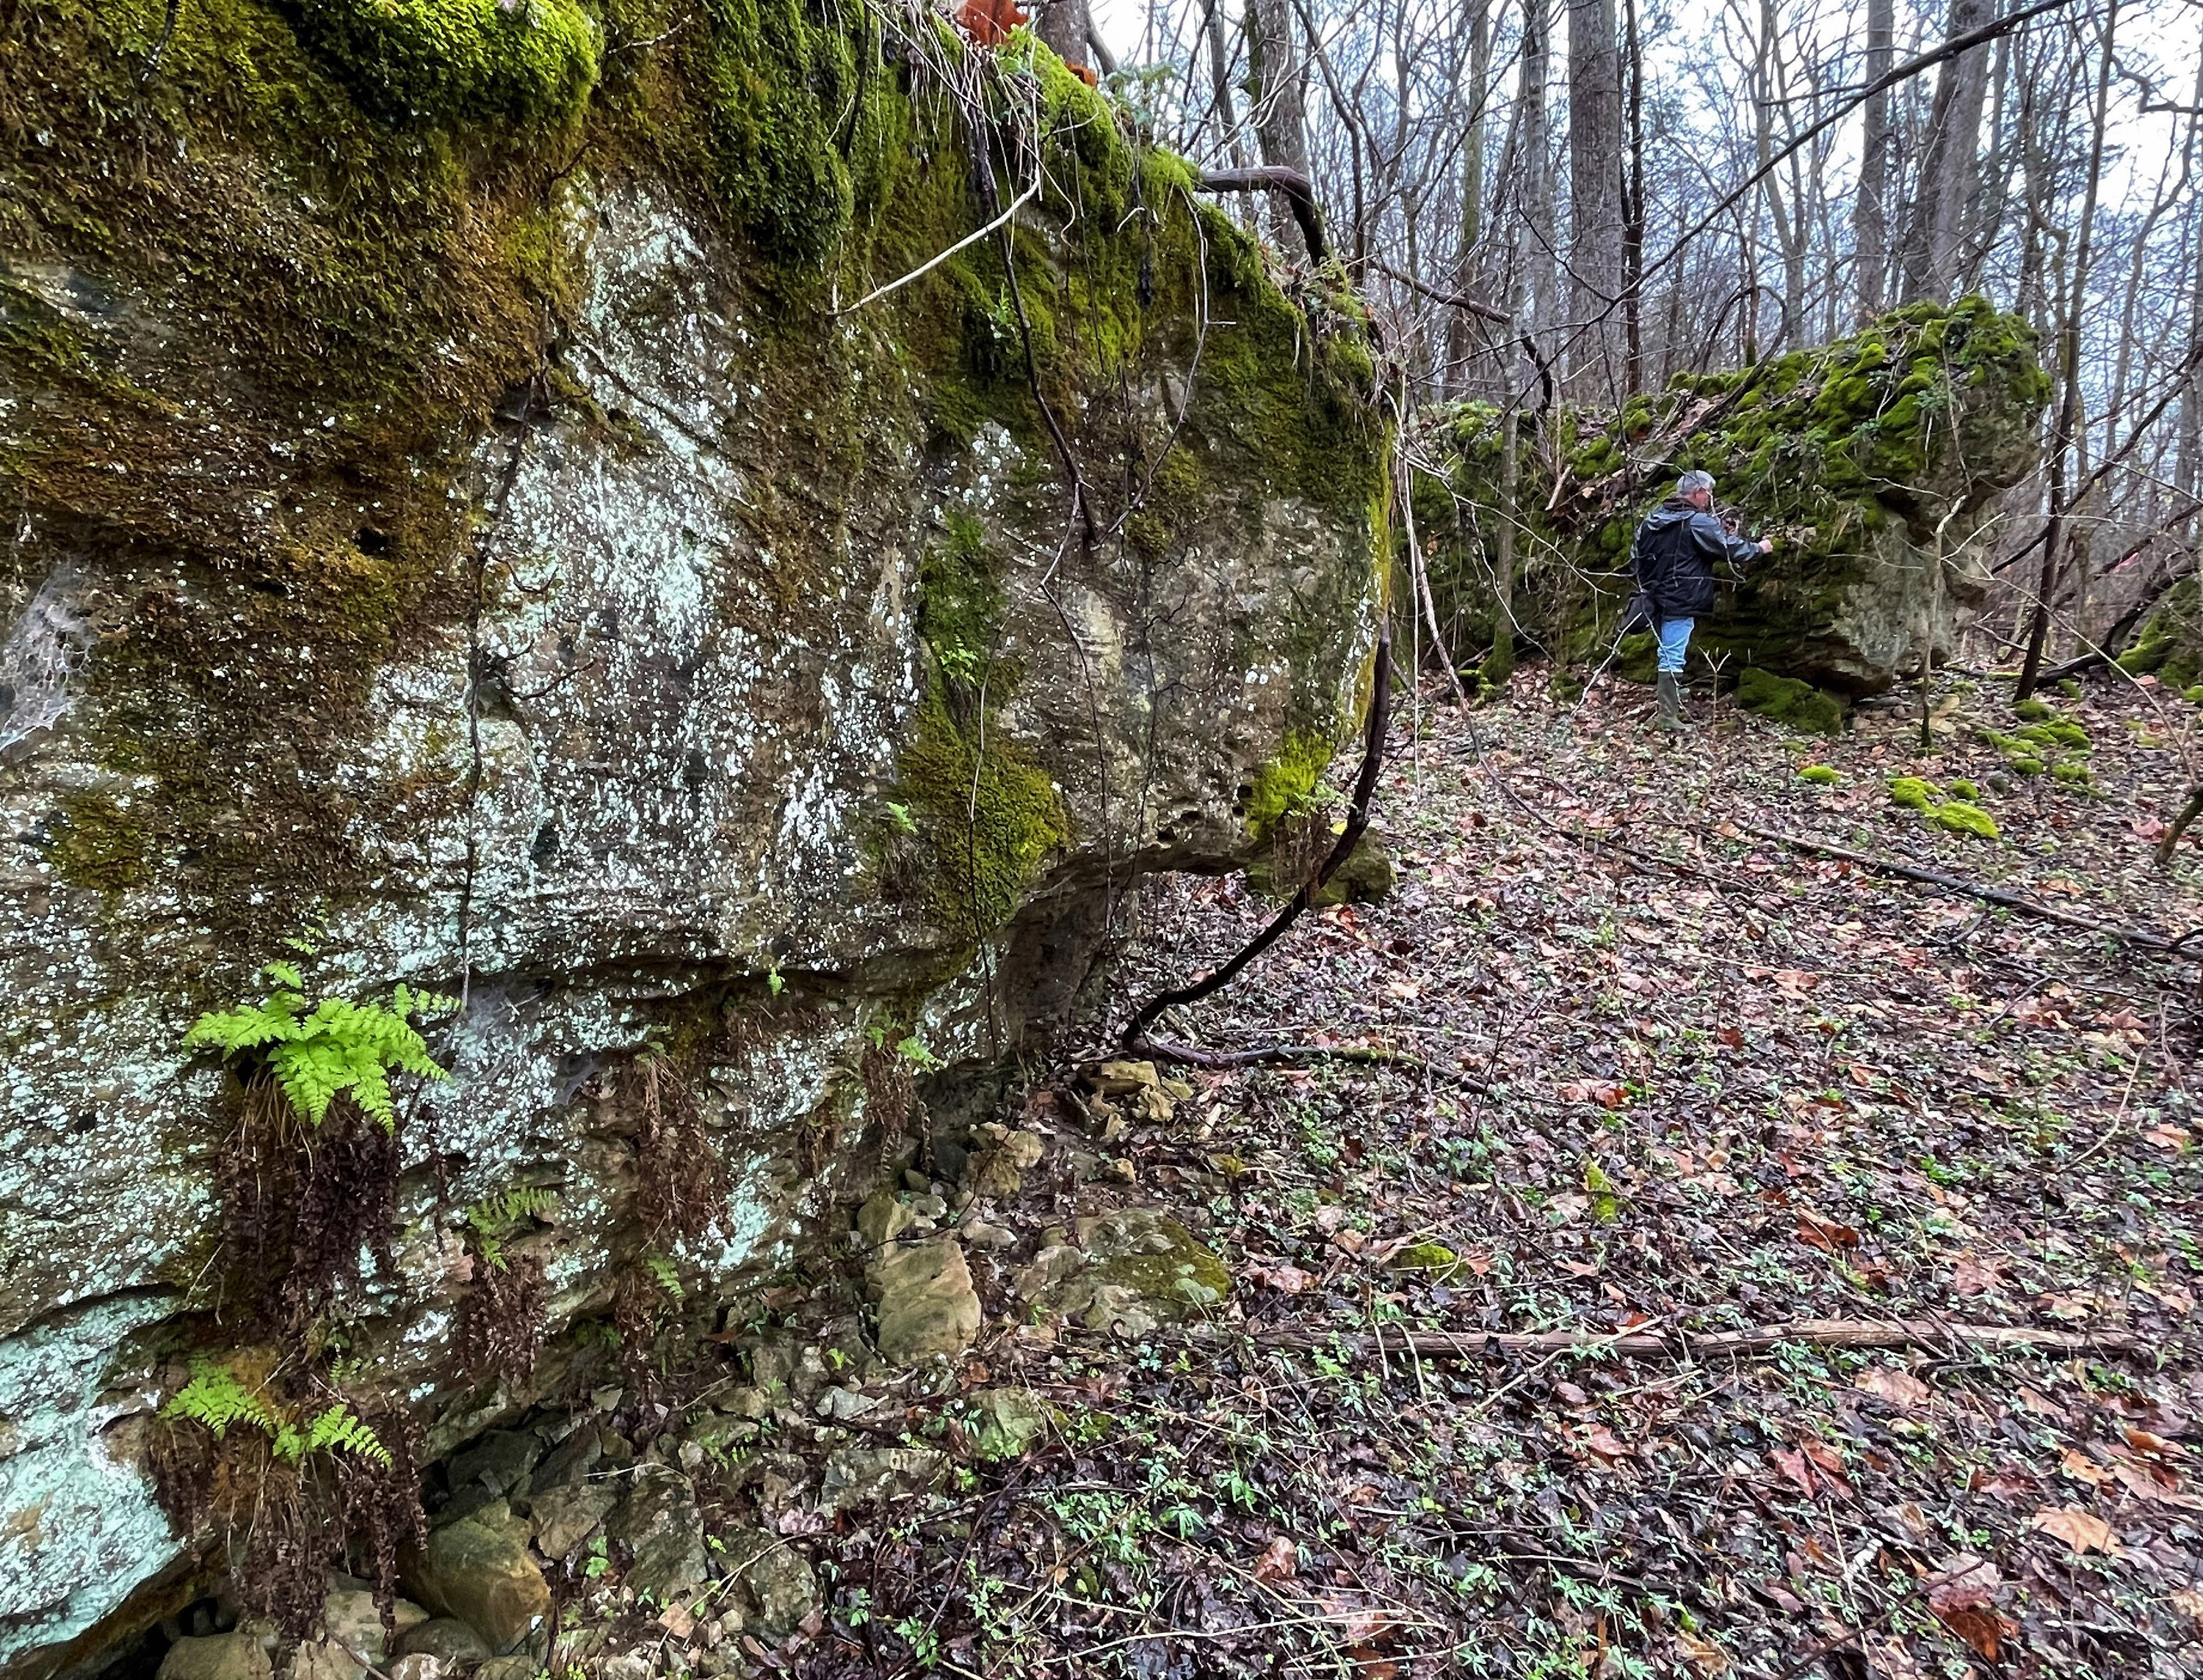 Large geologic slump blocks rise from the forest floor.